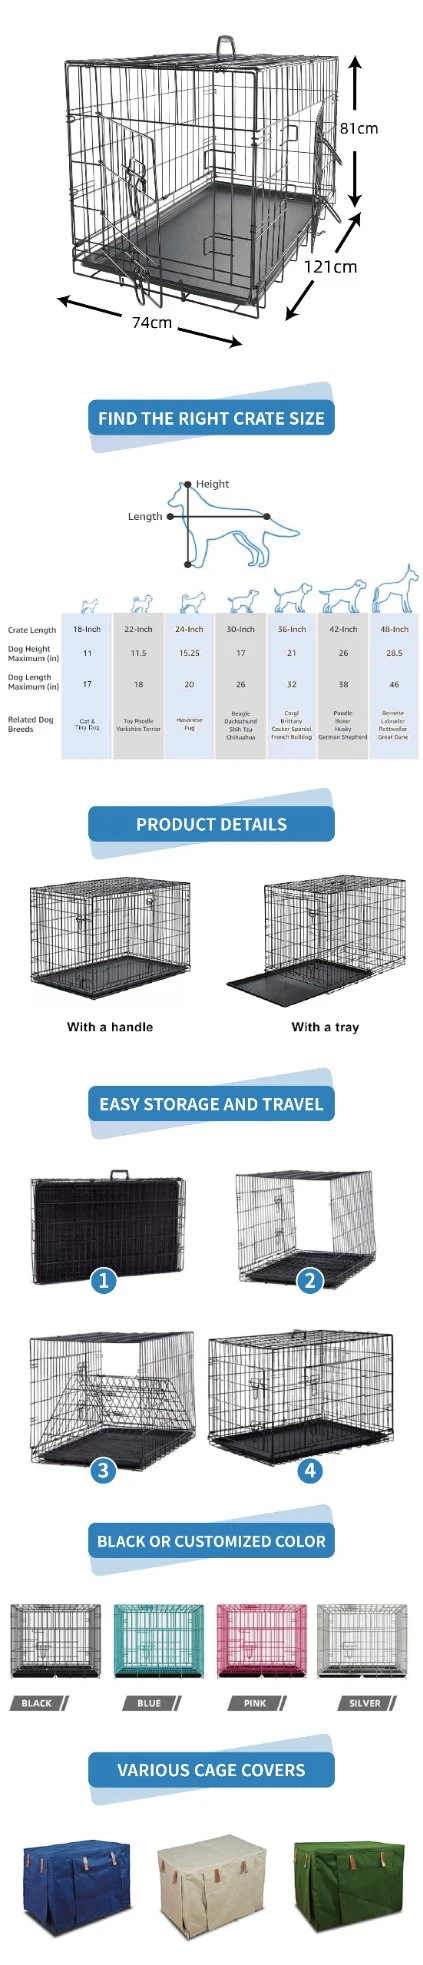 Excellence and Versatility with Our Premium 48-Inch Double Door Folding Metal Dog Crate